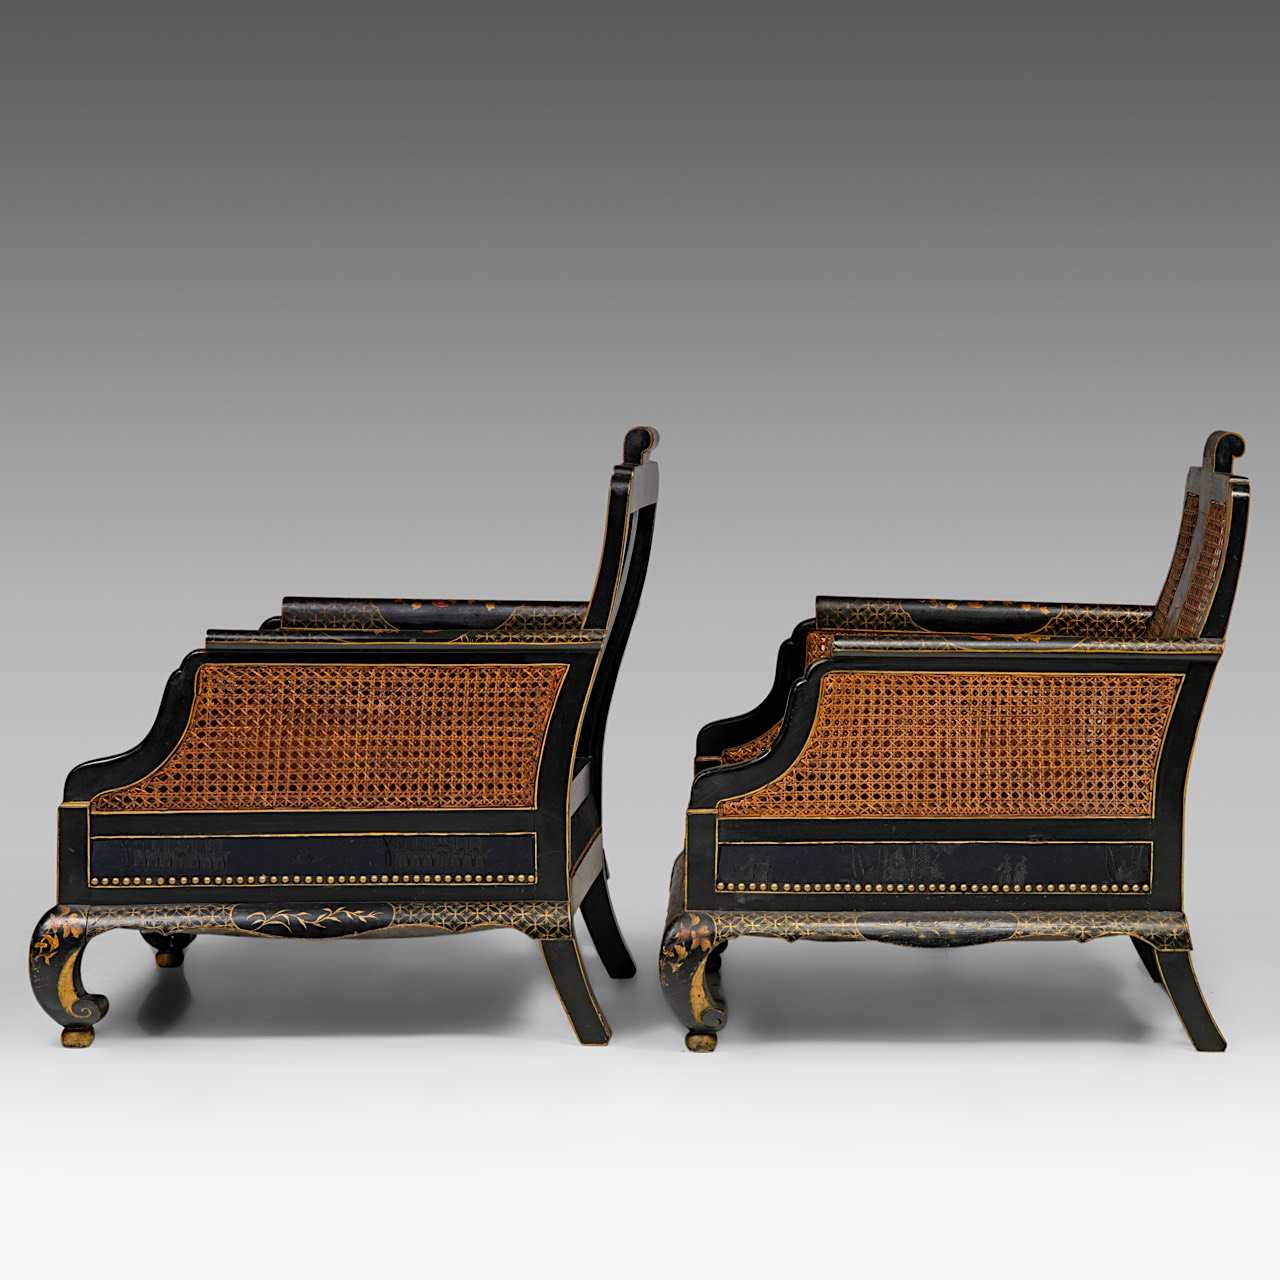 Two sets of handpainted Japonisme armchairs, with wicker panels, signed, H total 84 cm - H seat 36 c - Image 2 of 12